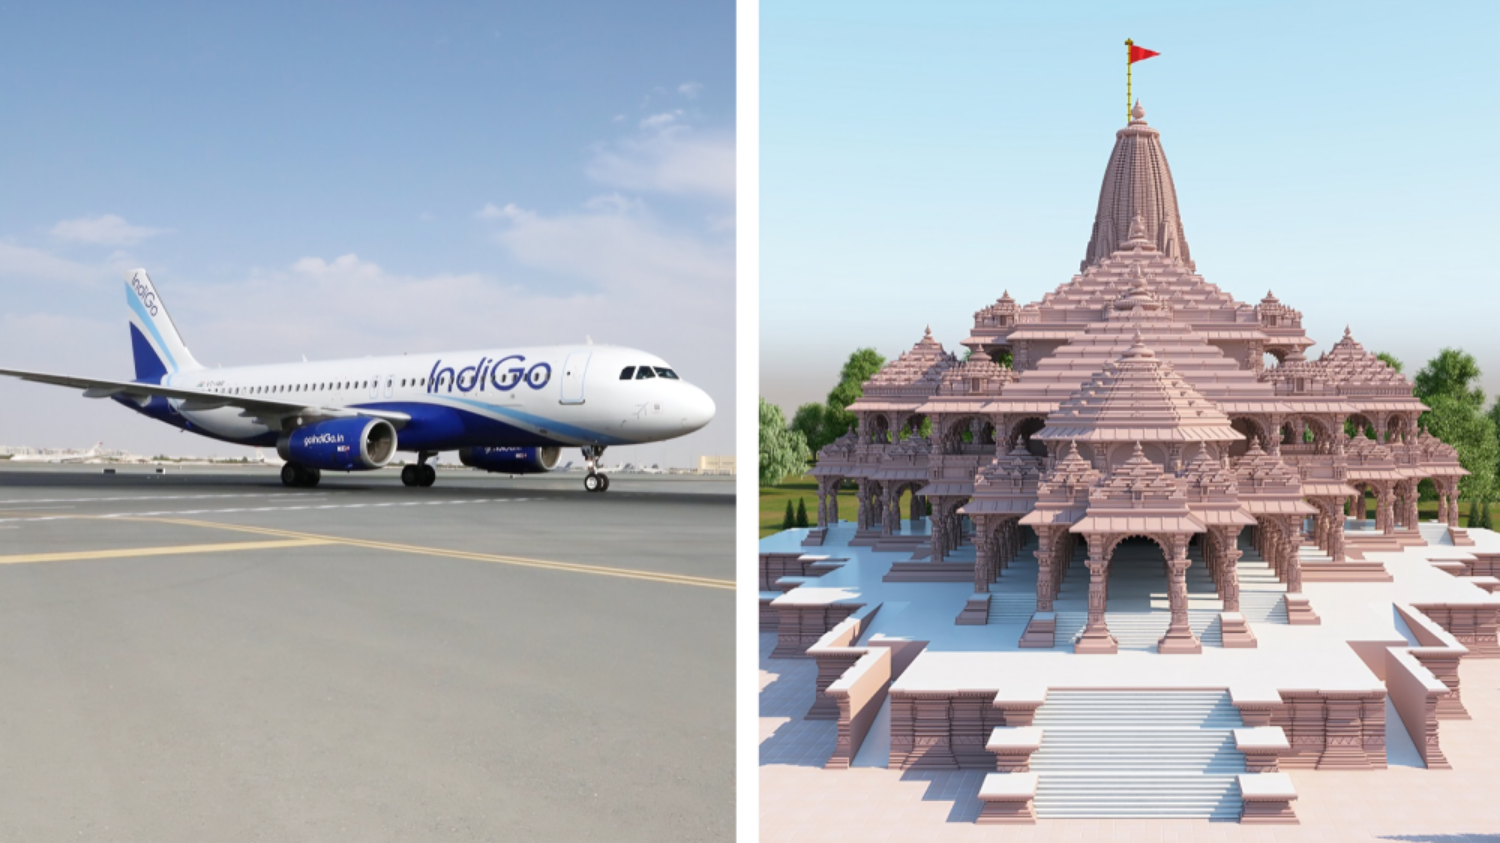 Let's go to Ayodhya! The first flight between Ahmedabad-Ayodhya started today, with slogans of Jai Shri Ram की तस्वीर